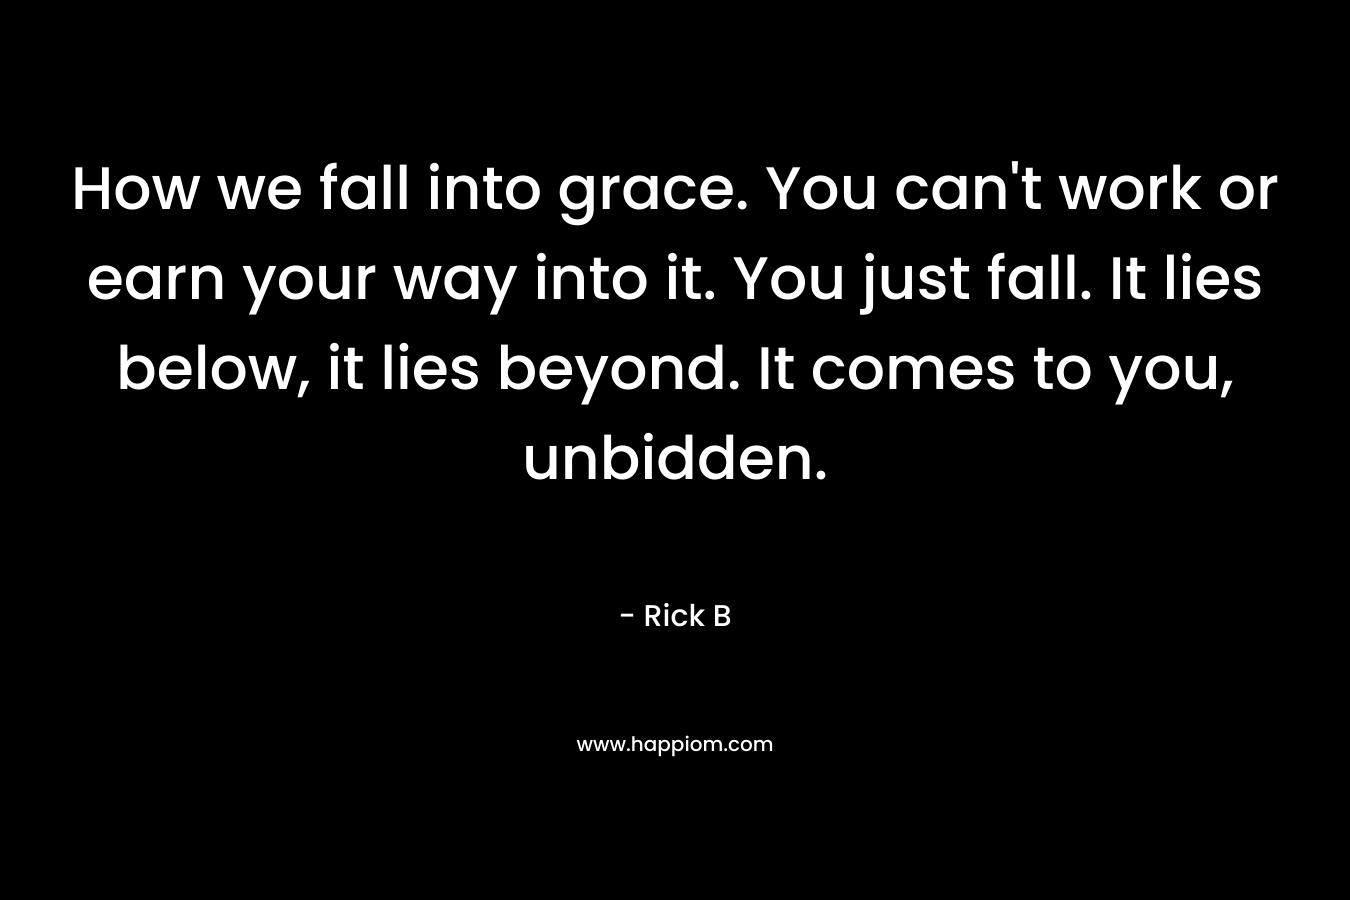 How we fall into grace. You can't work or earn your way into it. You just fall. It lies below, it lies beyond. It comes to you, unbidden.